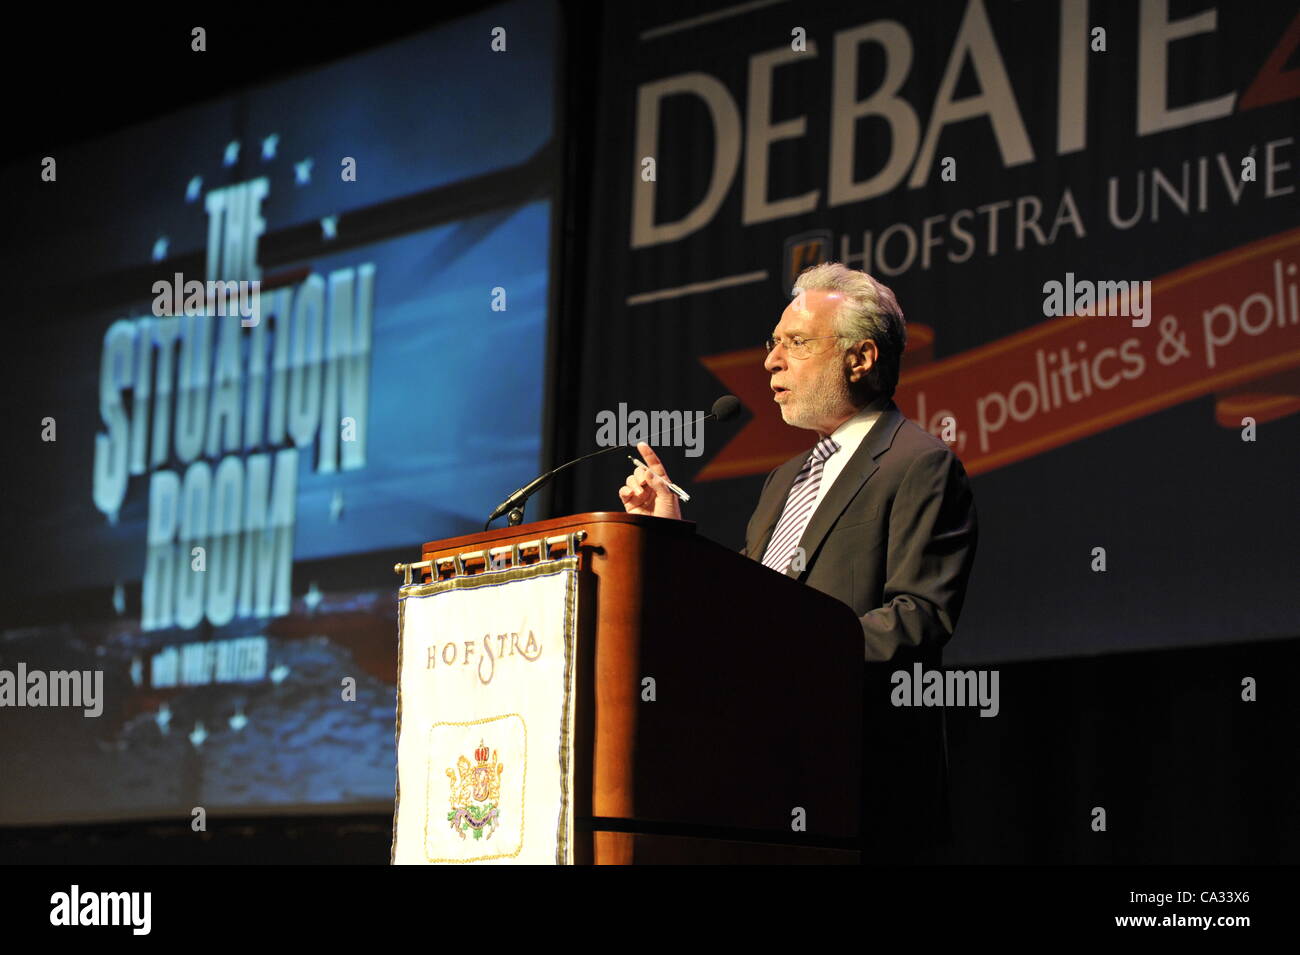 Wolf Blitzer, anchor of CNN’s The Situation Room, speaking at Hofstra University on Thursday, March 29, 2012, in Hempstead, New York, USA. During Blitzer's talk, he shared news clips, including from CNN presidential primary debates he moderated and Election Night 2008 which he anchored. Hofstra's "T Stock Photo